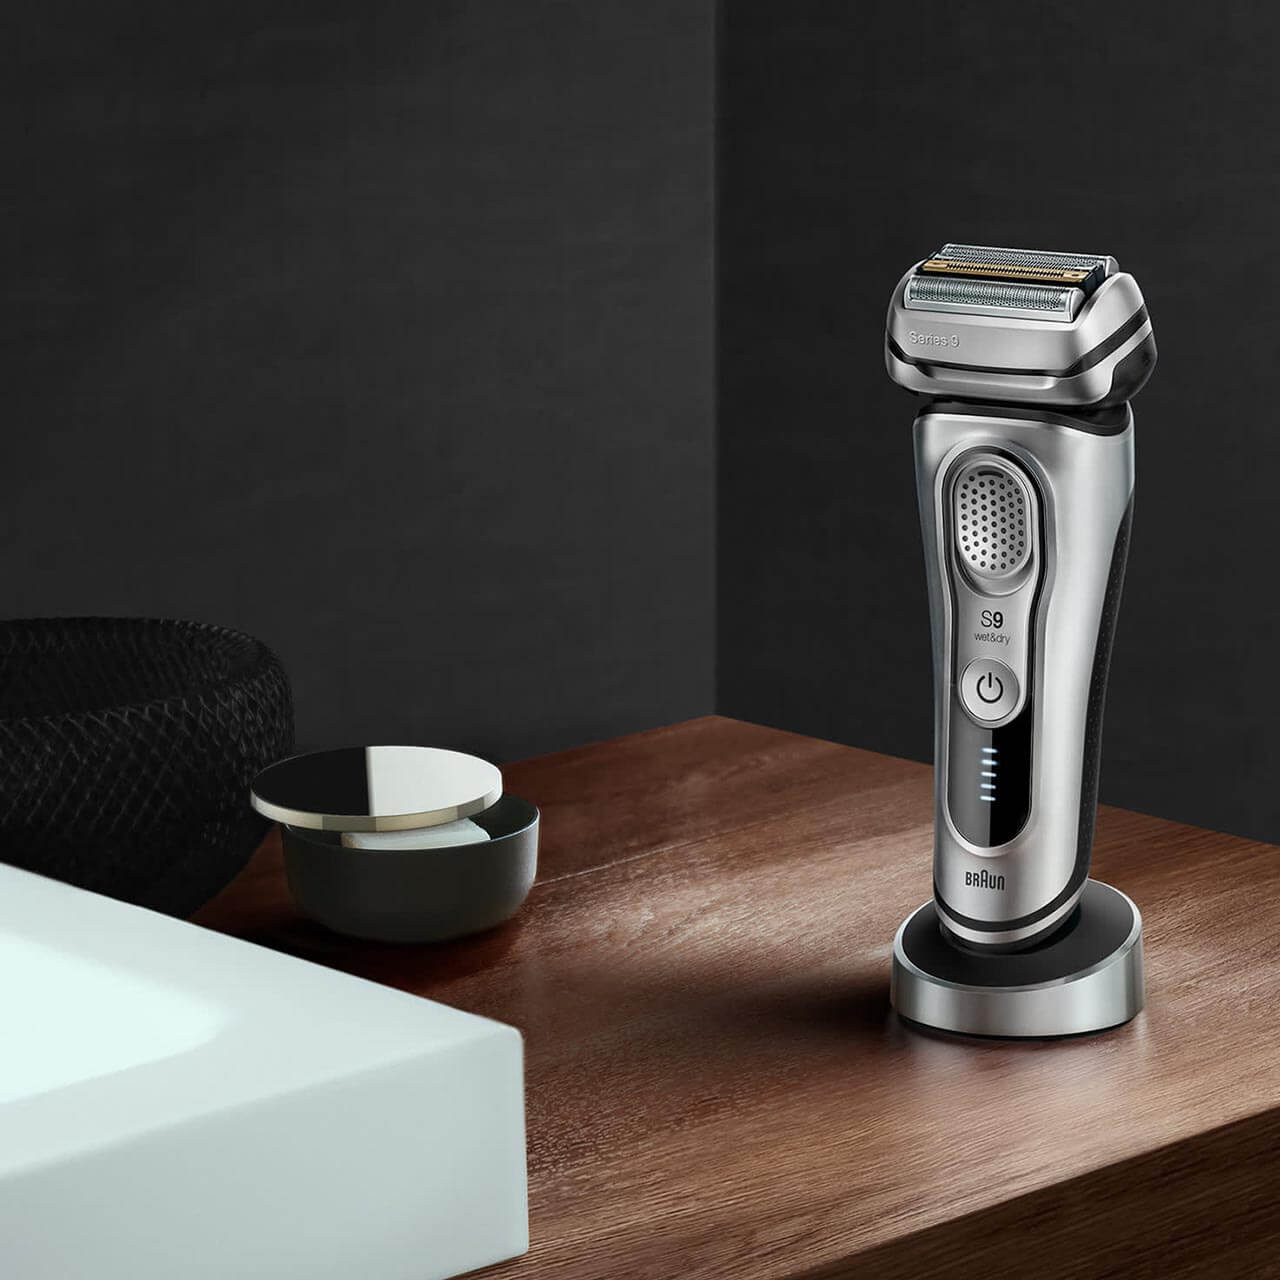 https://cdn11.bigcommerce.com/s-61qnoipi5/images/stencil/1280x1280/products/124/513/04_Braun_ElectricShaver_series-9-9330s-silver-charging-stand1280x1280__80702.1616174082.jpg?c=2